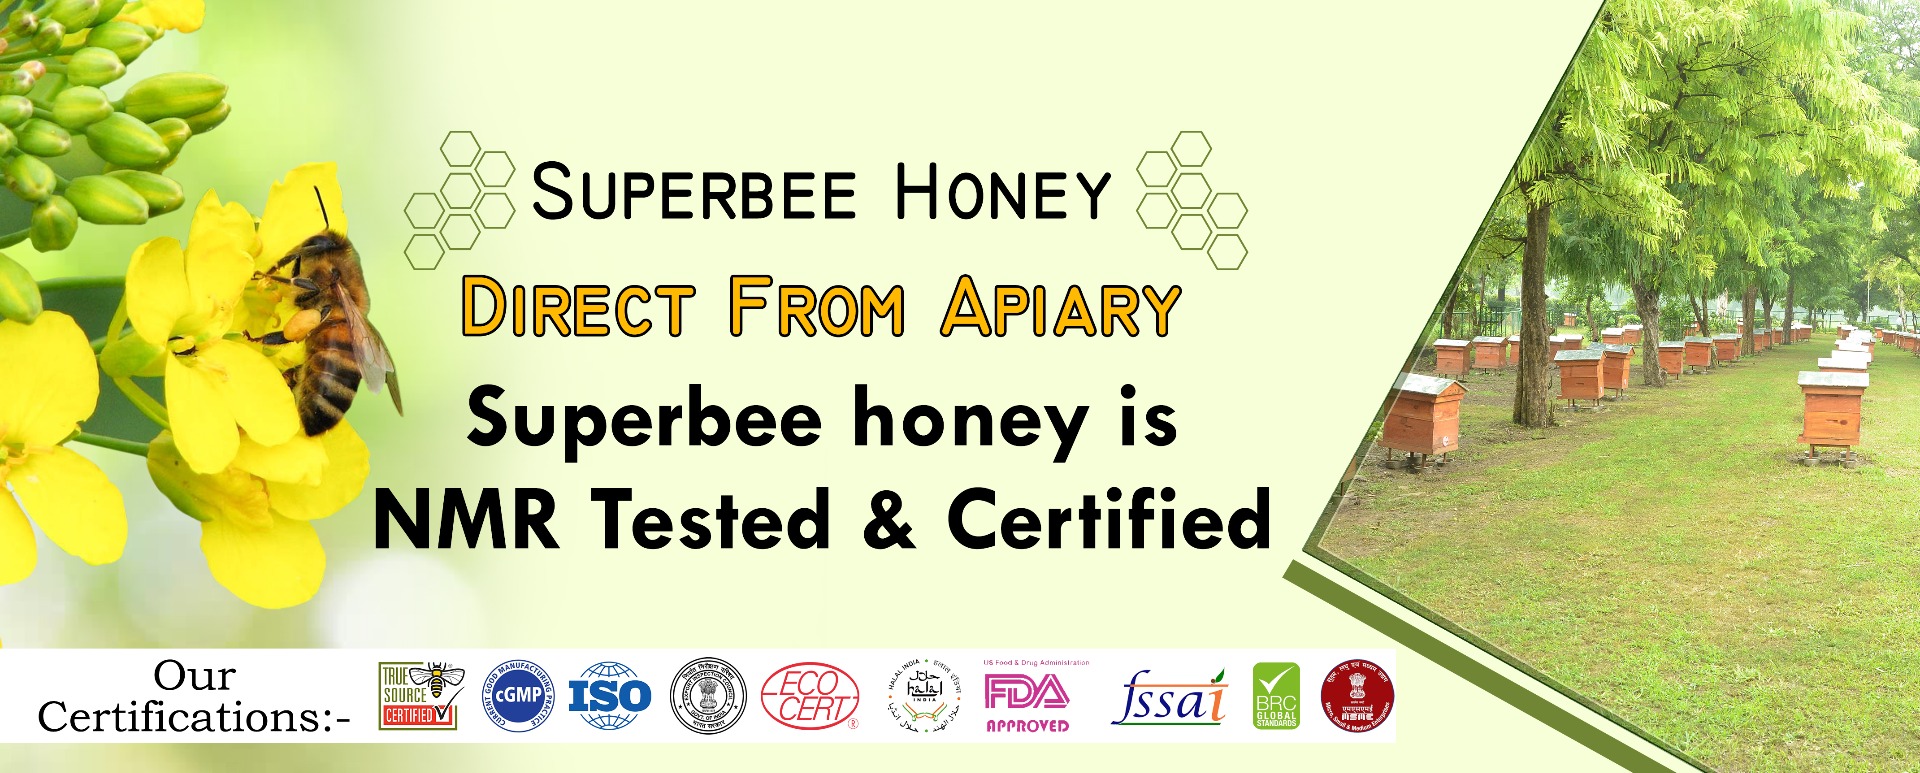 Hi-Tech Natural Products (India) Ltd. - Pure and Organic Honey Dealer in GTB Enclave, Dilshad Garden